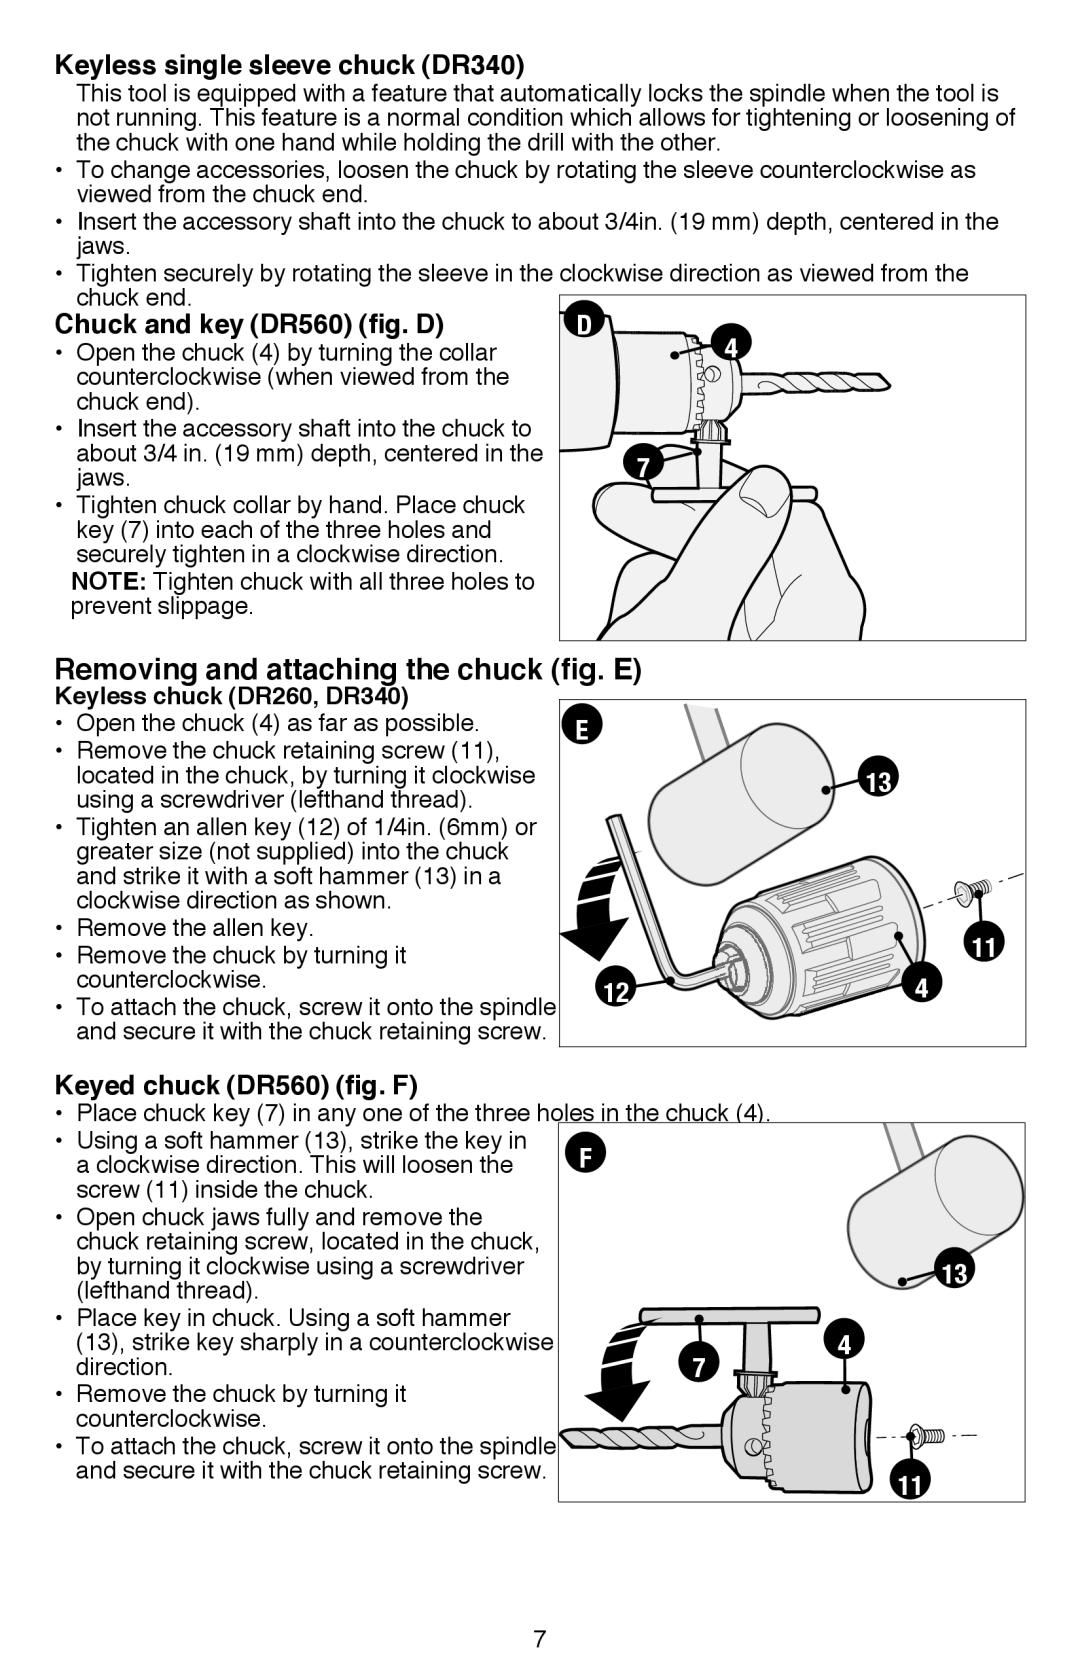 Black & Decker DR260BR instruction manual Removing and attaching the chuck fig. E, Keyless single sleeve chuck DR340 